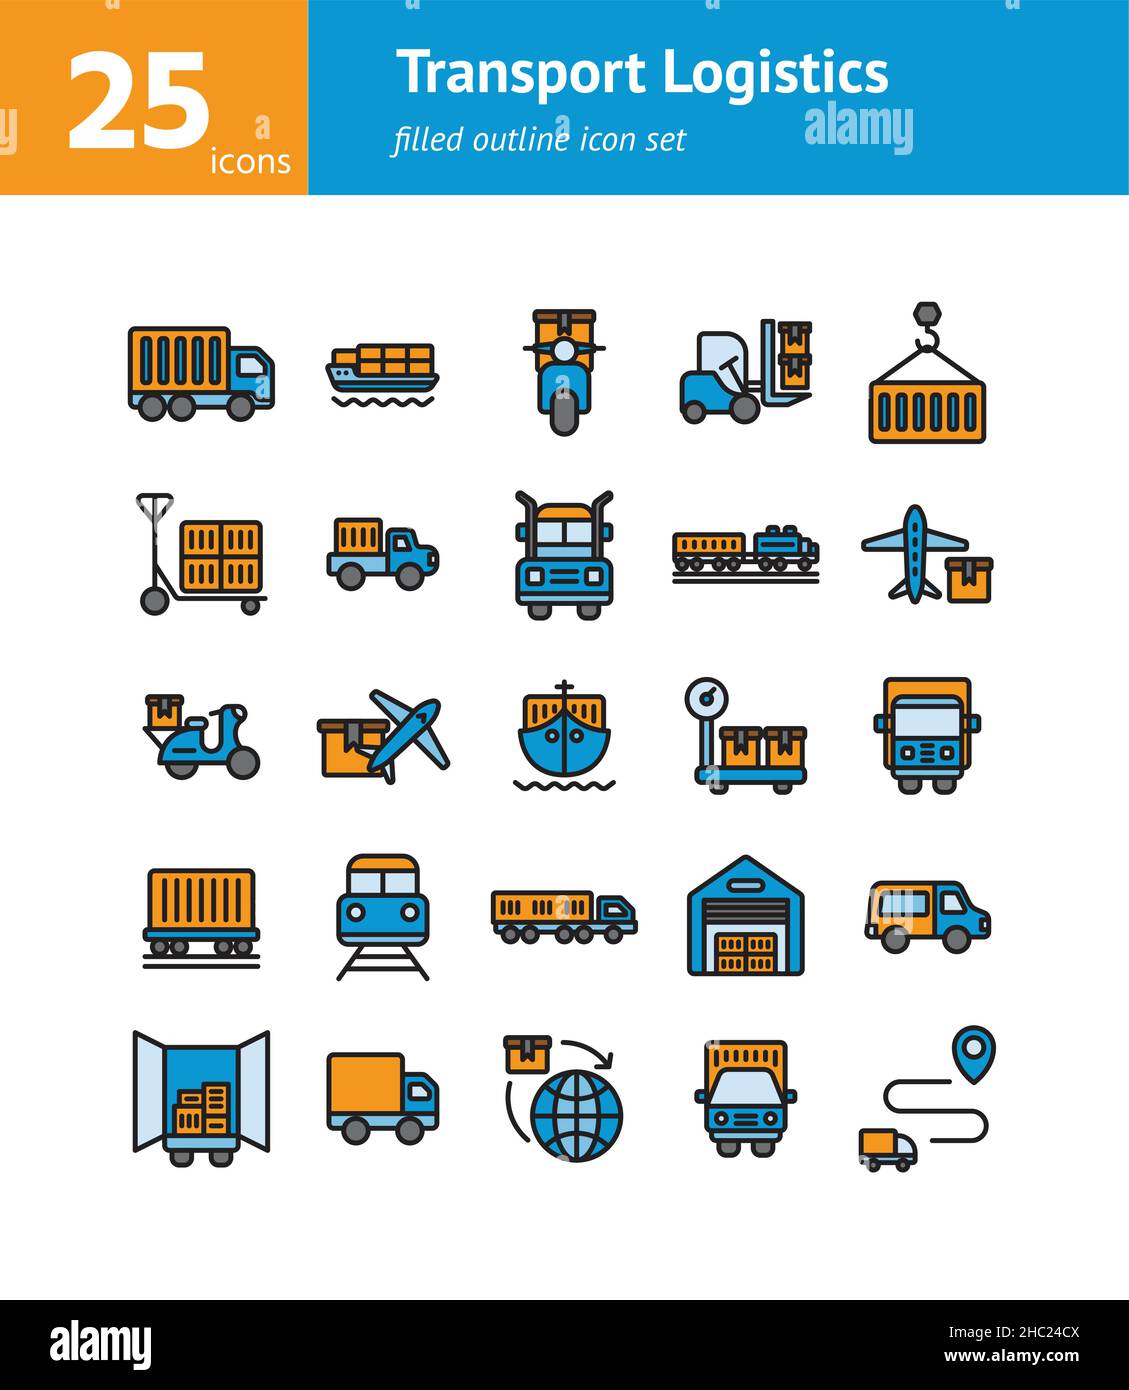 Transport Logistics filled outline icon set. Vector and Illustration. Stock Vector